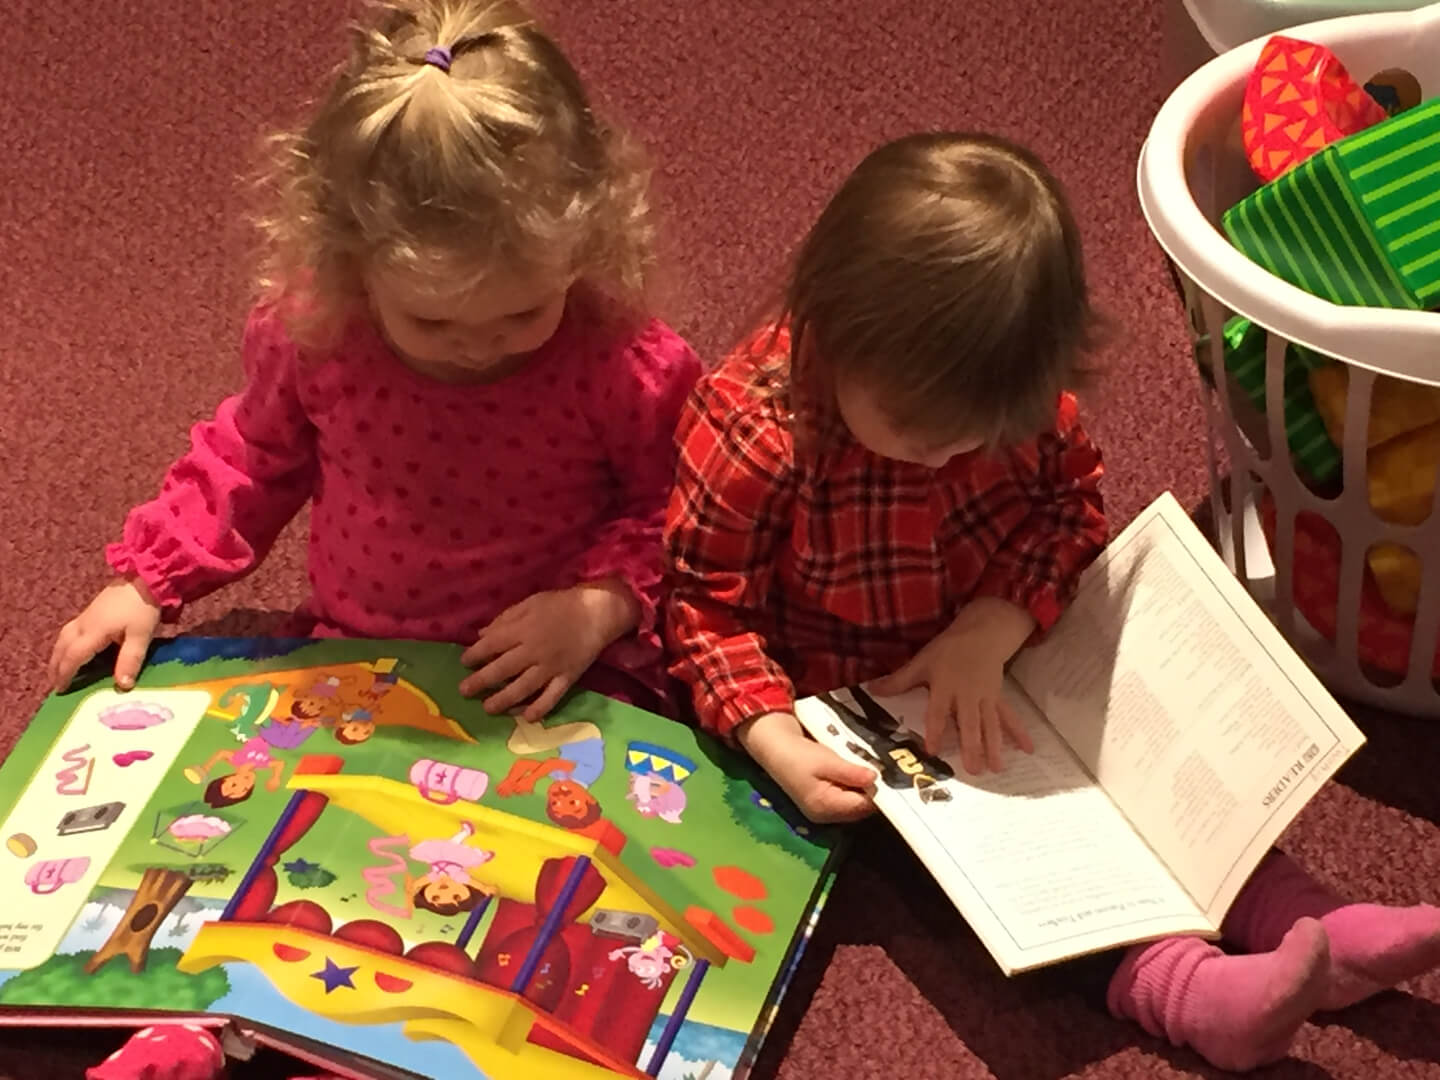 Two kids reading books